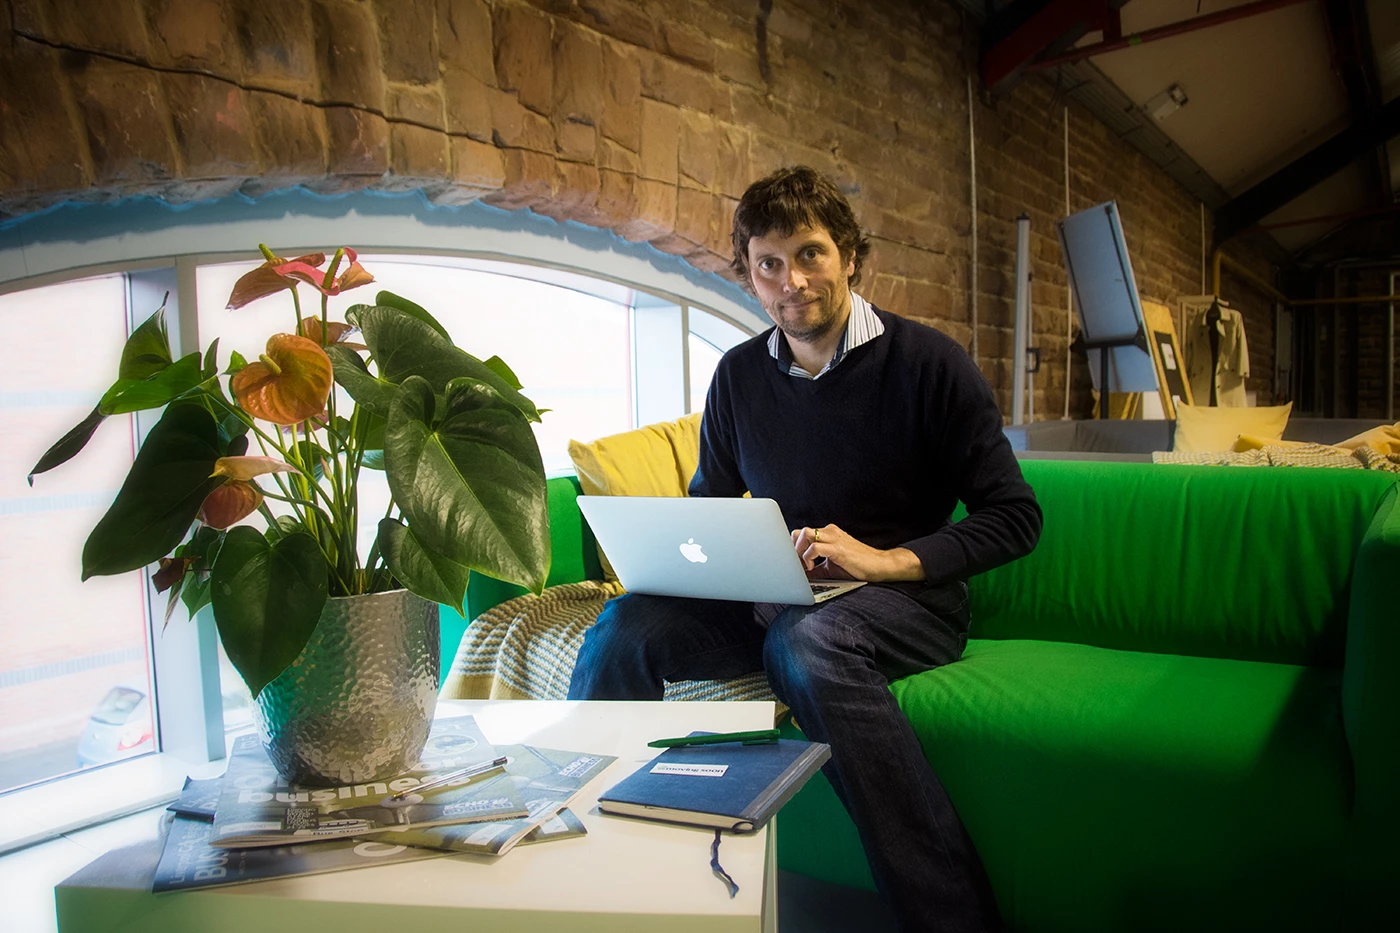 Paul Malone operates his site movingsoon.co.uk from The Sheds co-working space on The Wirral